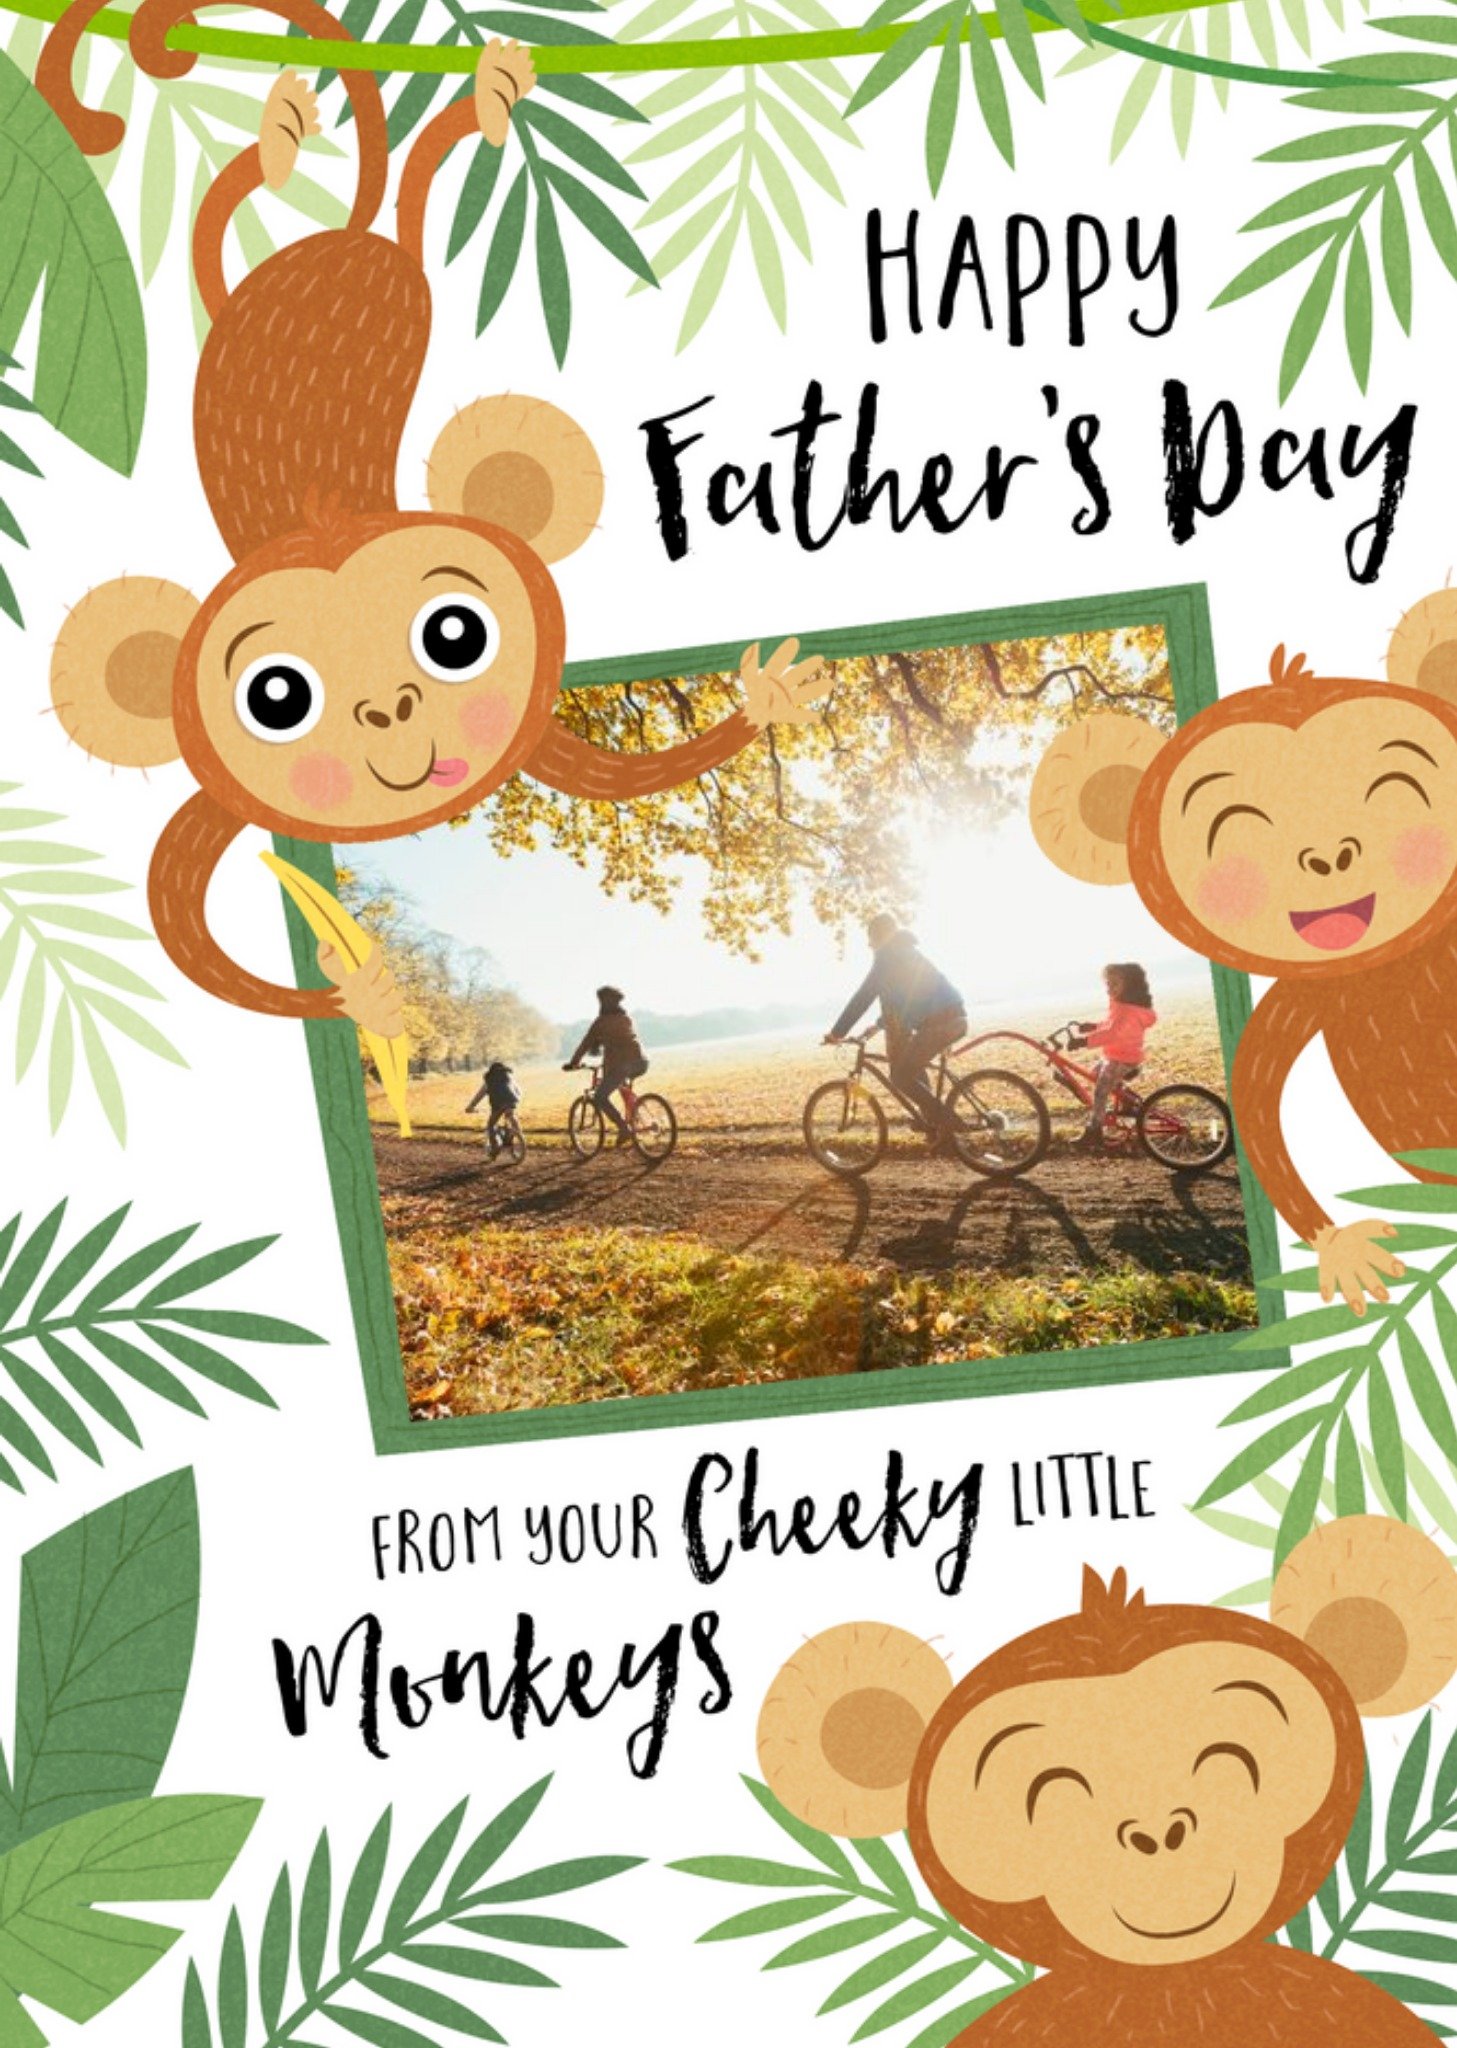 Moonpig Cute From Your Cheeky Little Monkeys Photo Upload Father's Day Card Ecard